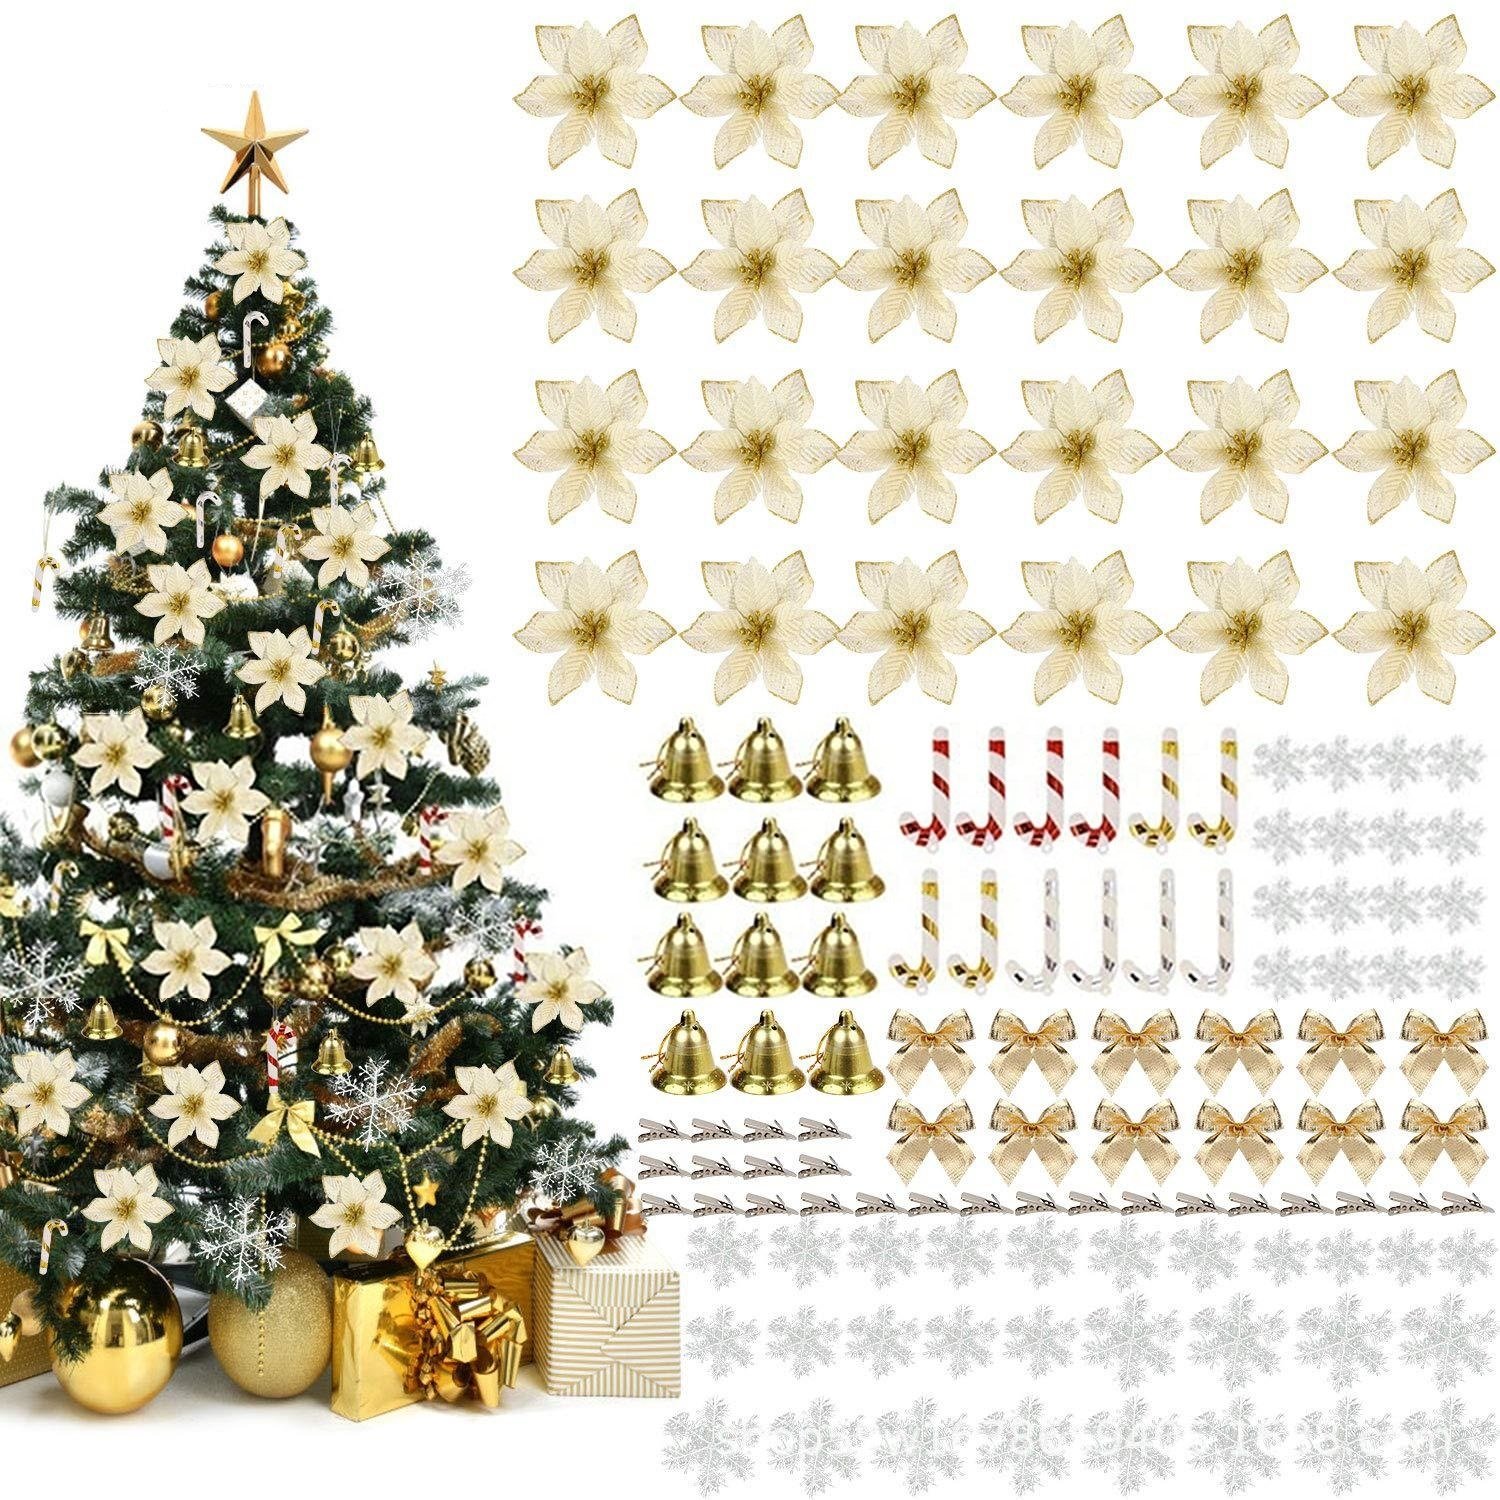 Christmas Tree Decoration Set Artificial Flower Bows Snowflakes Bell Canes 120pcs